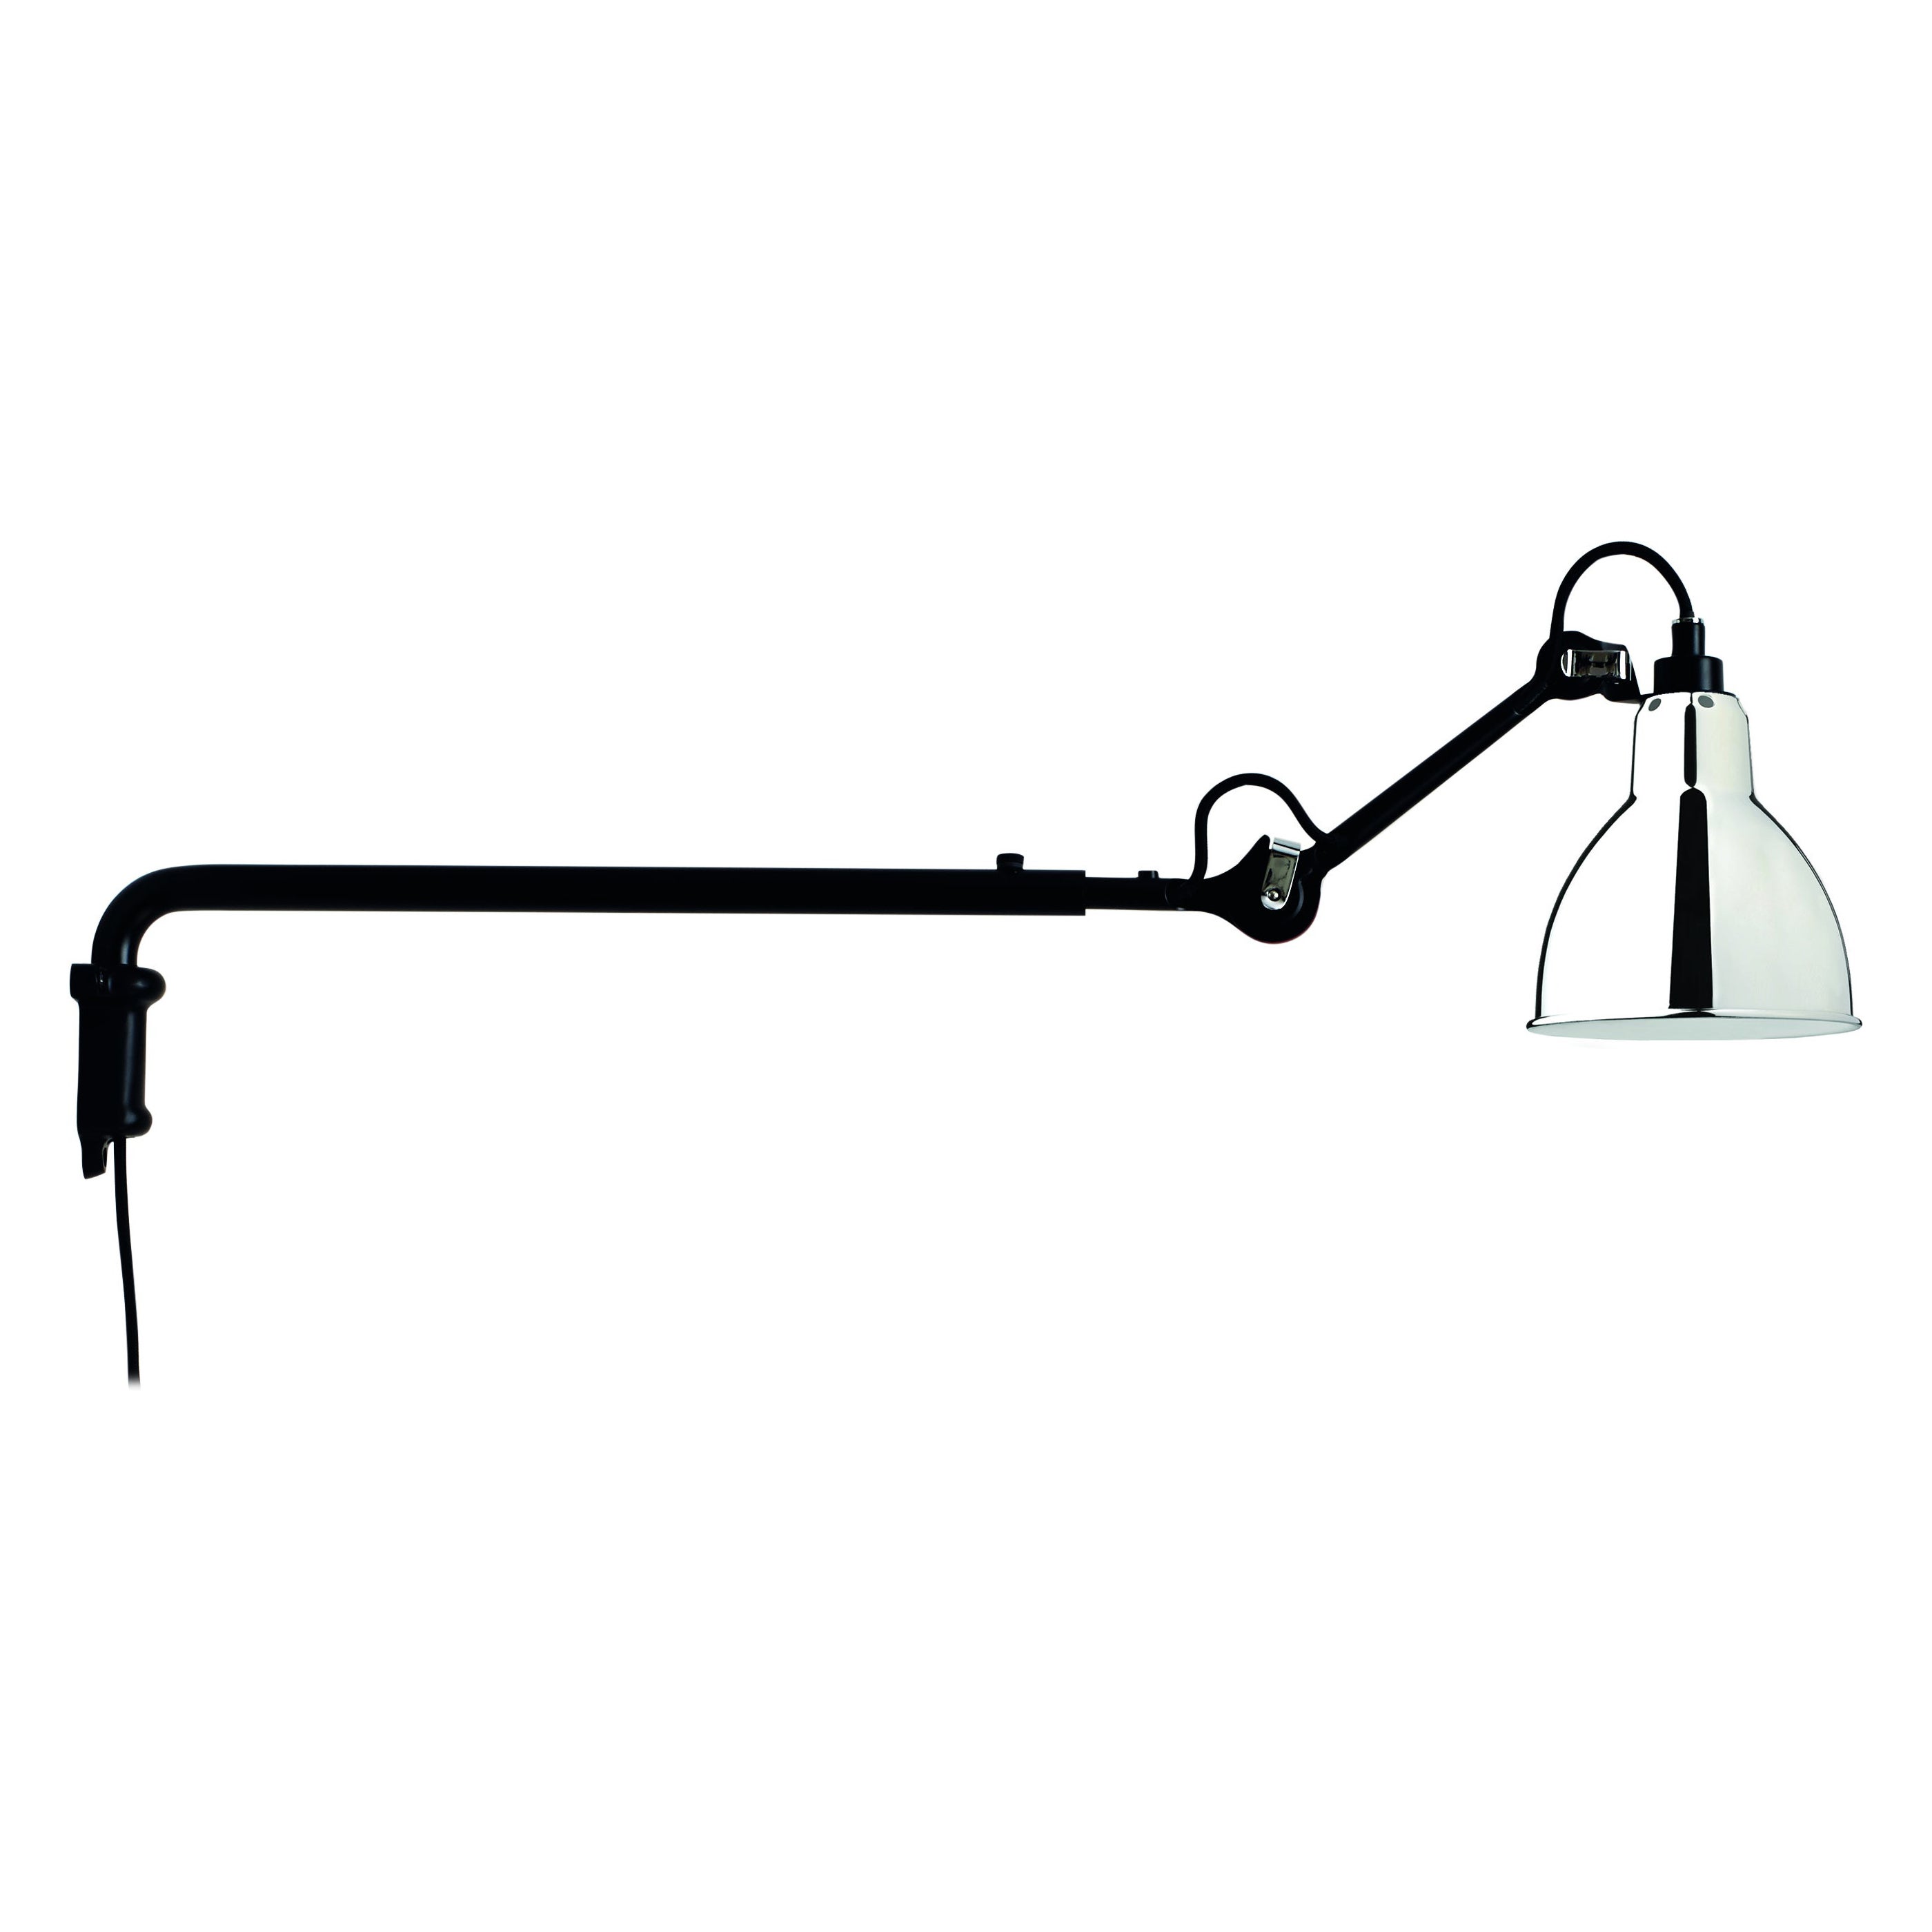 DCW Editions La Lampe Gras N°203 Wall Lamp in Black Steel Arm and Chrome Shade